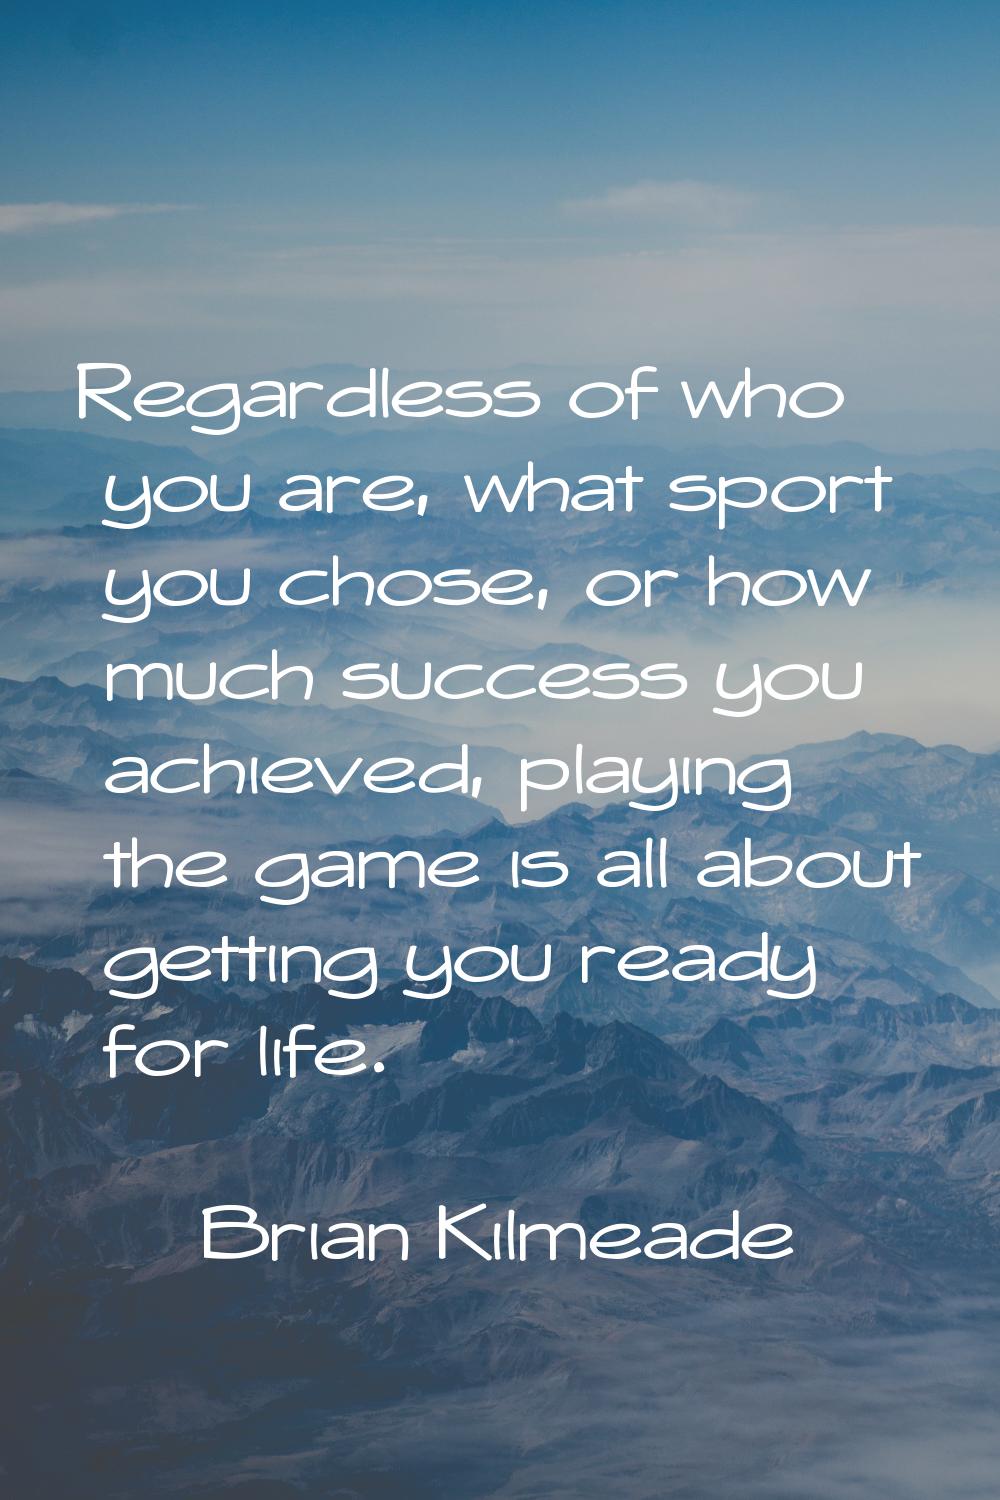 Regardless of who you are, what sport you chose, or how much success you achieved, playing the game